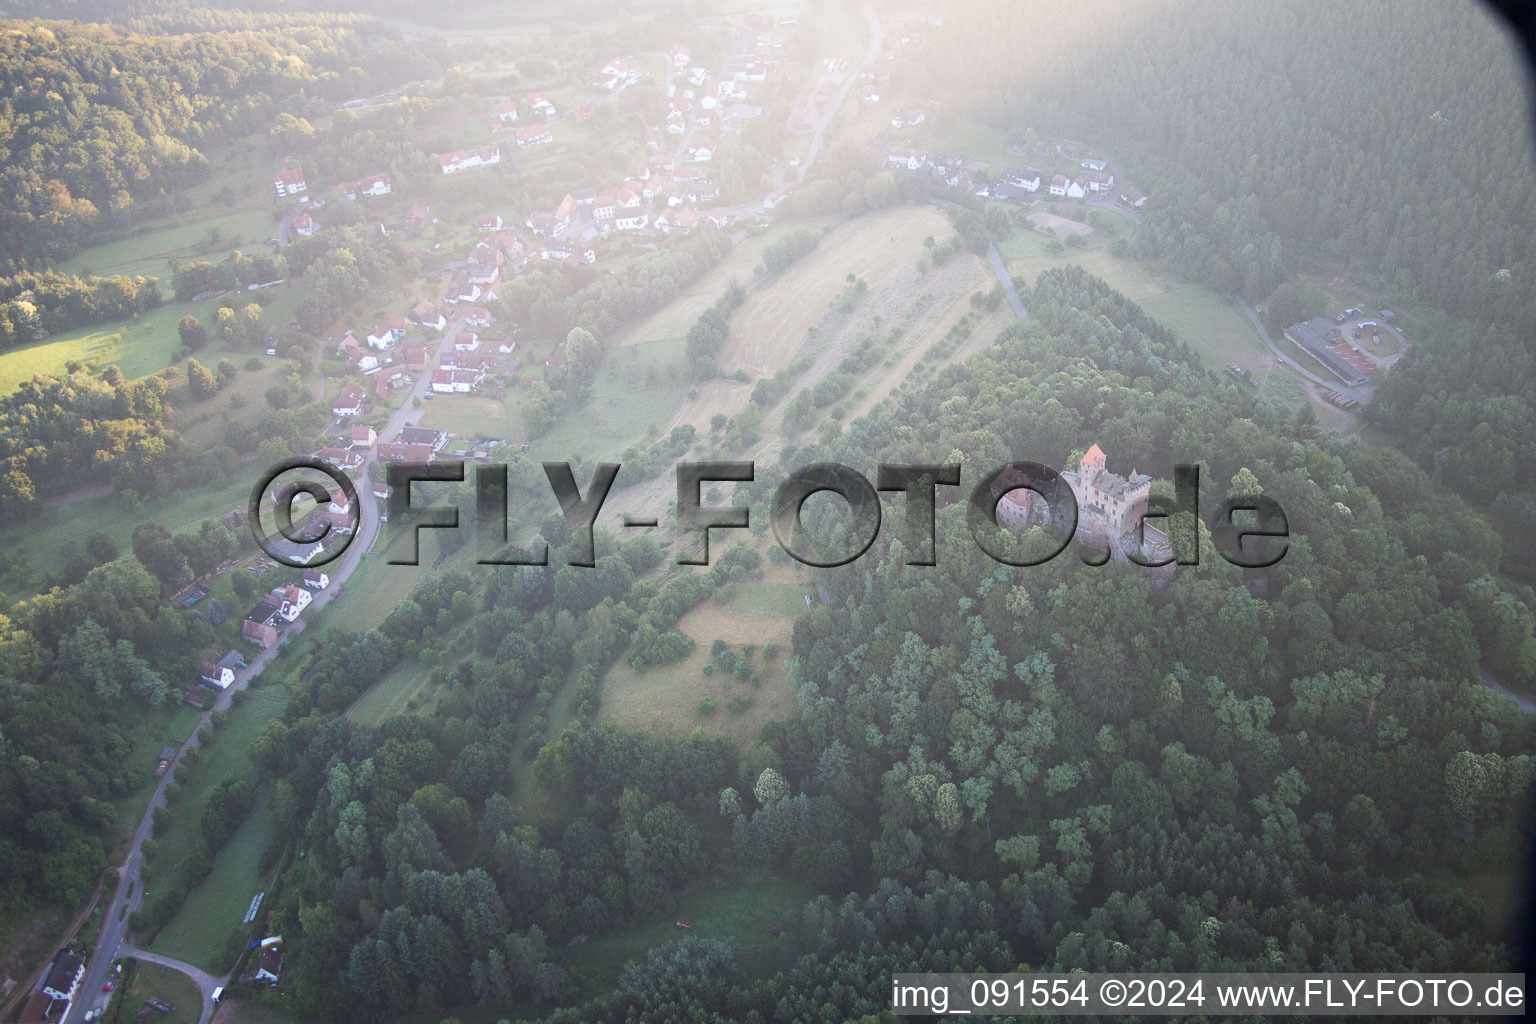 Erlenbach bei Dahn in the state Rhineland-Palatinate, Germany seen from above